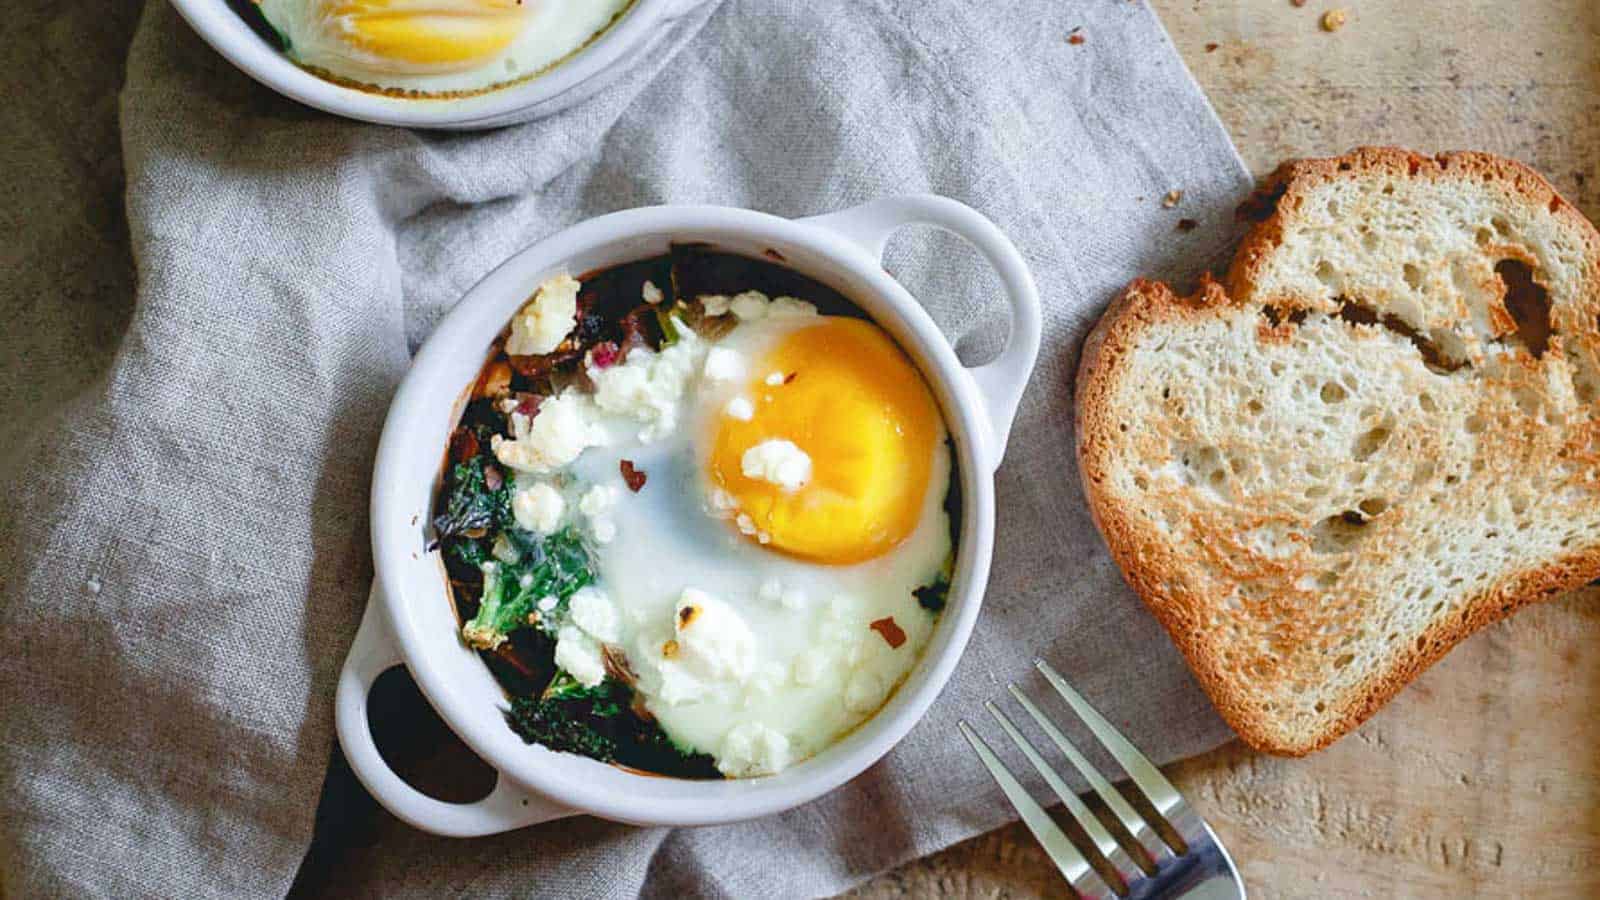 Two bowls of kale feta egg bake with spinach and bread on a table.